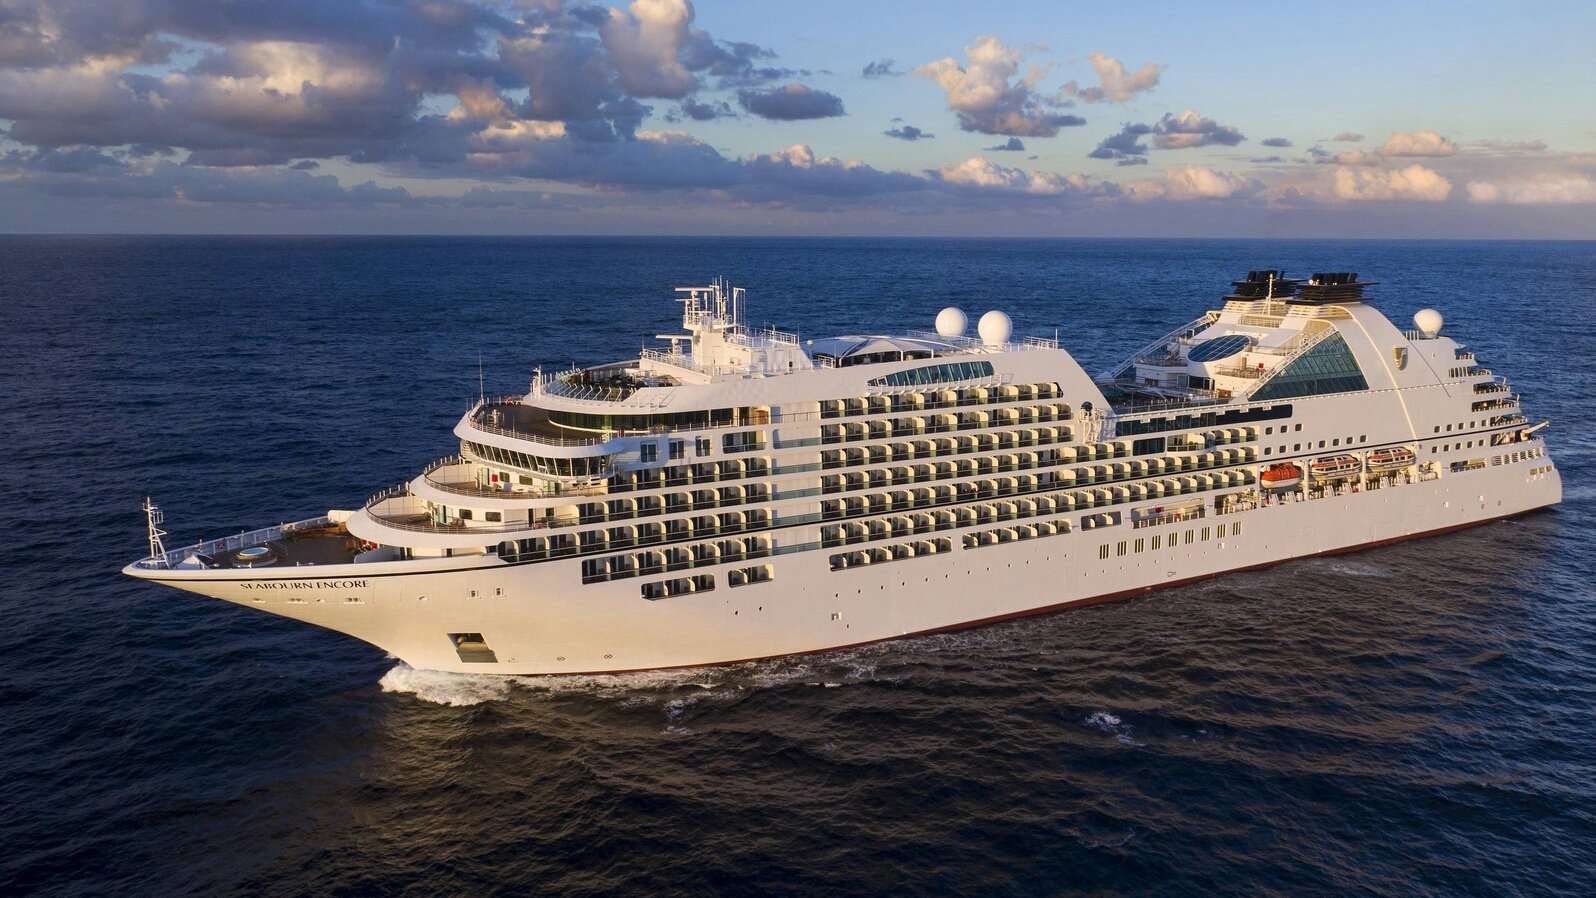 Seabourn voted best small